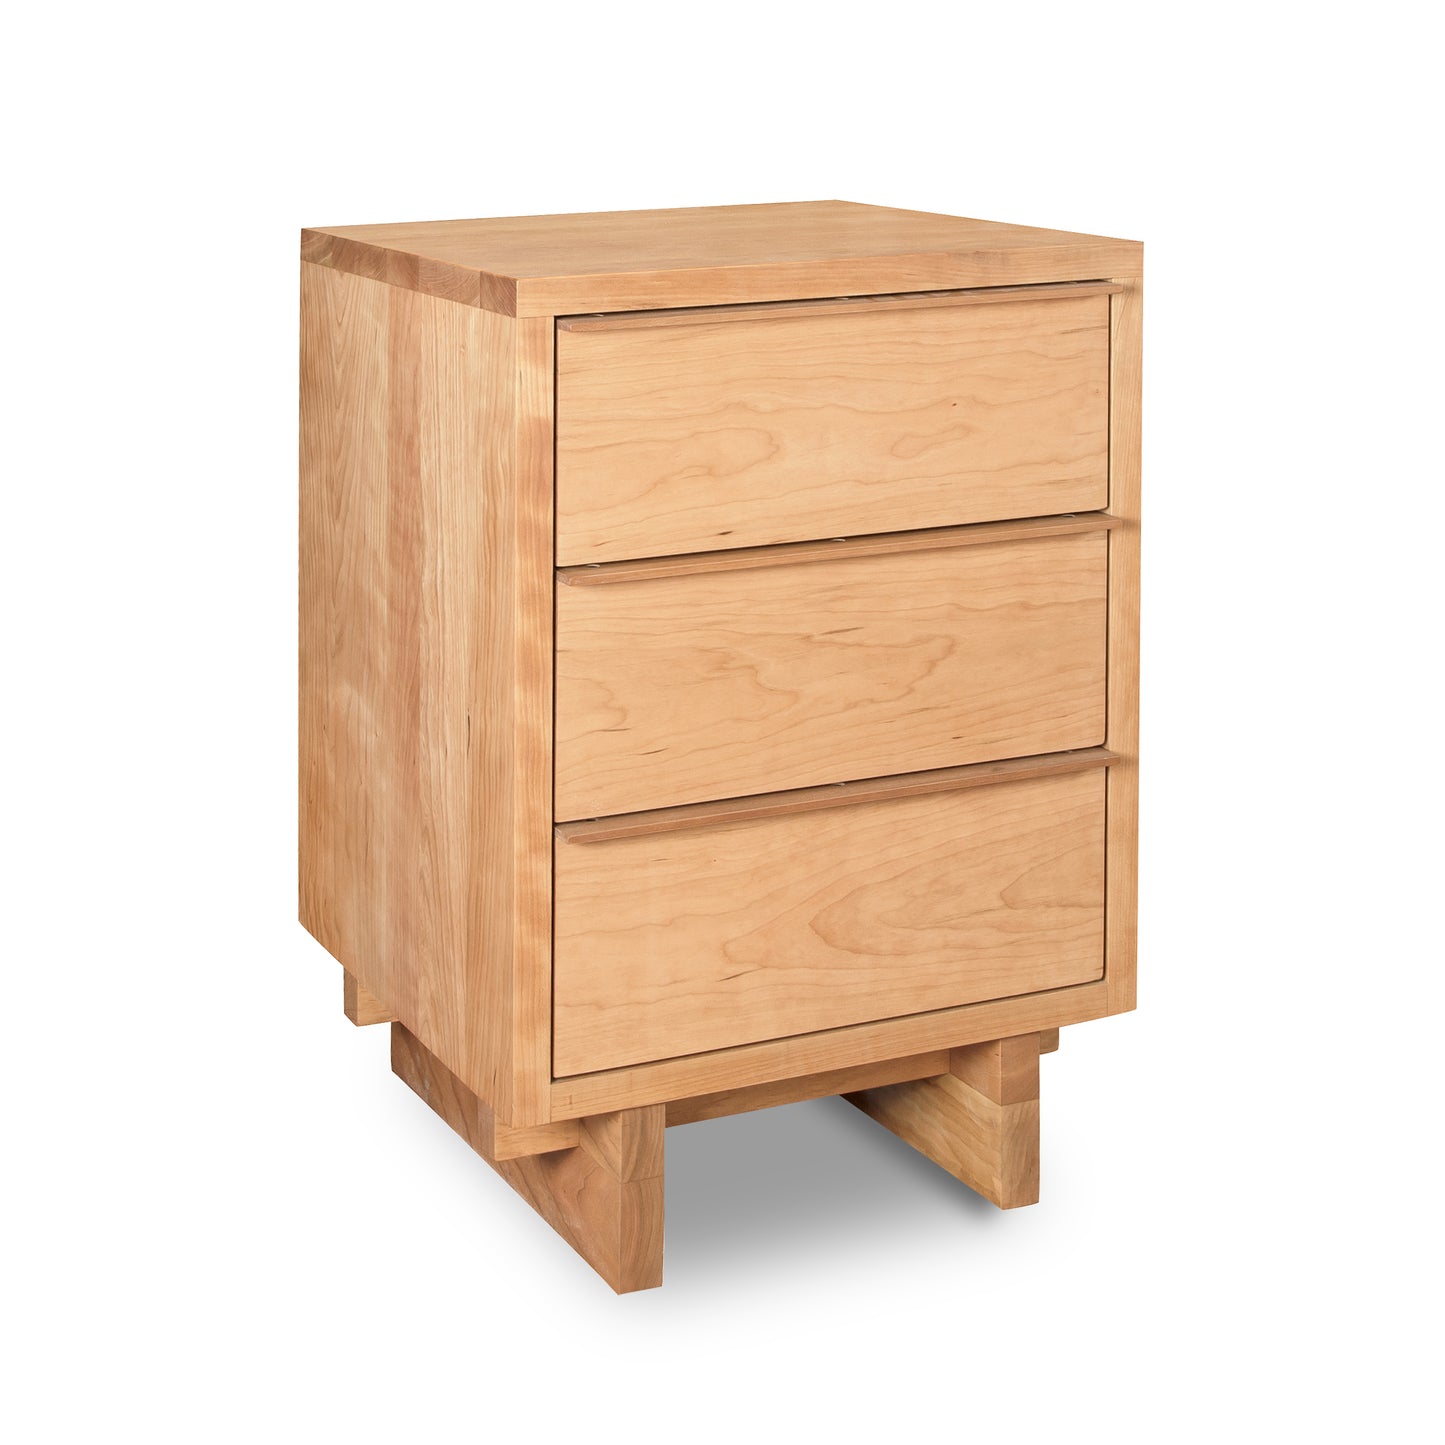 A modern design Vermont Furniture Designs Kipling 3-Drawer Nightstand isolated on a white background.